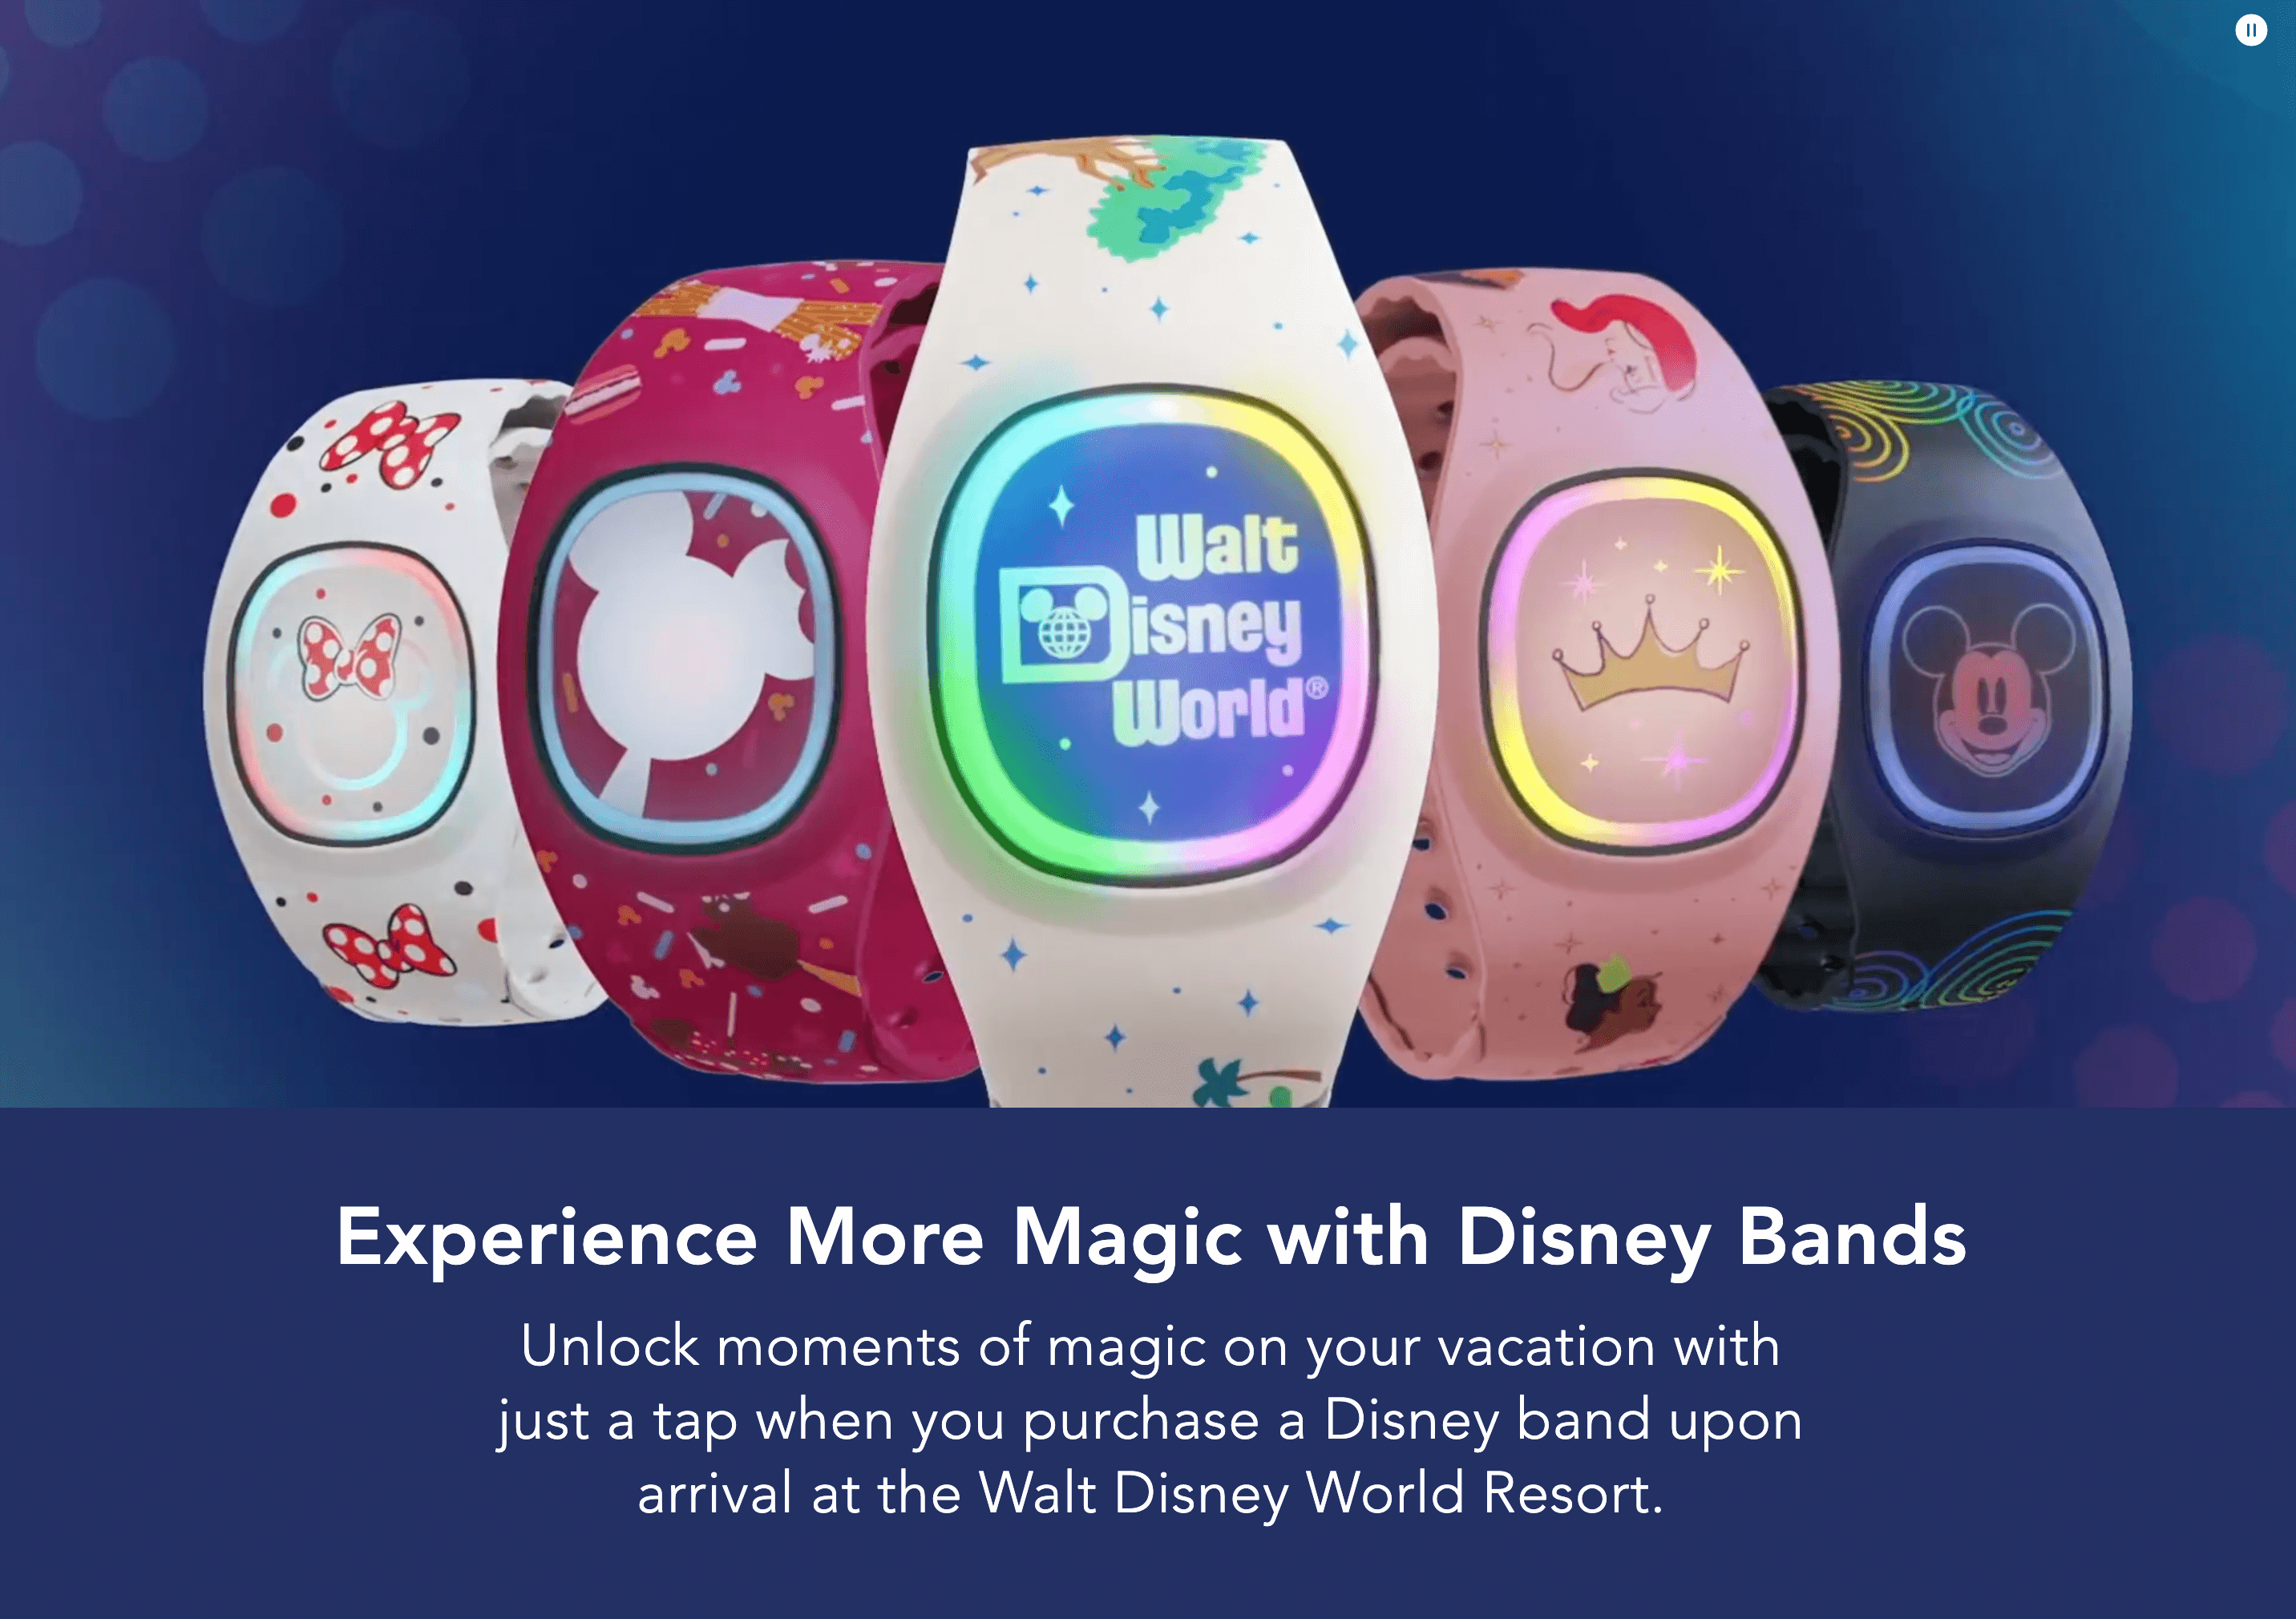 A screenshot from Disney’s website page explaining Disney Bands. There is an image of 5 colorful watch bands decorated with icons like the Mickey and Minnie Mouse ears, a crown, and the Walt Disney World logo. There is text under the image: Experience More Magic with Disney Bands. Unlock moments of magic on your vacation with just a tap when you purchase a Disney band upon arrival at the Walt Disney World Resort. 